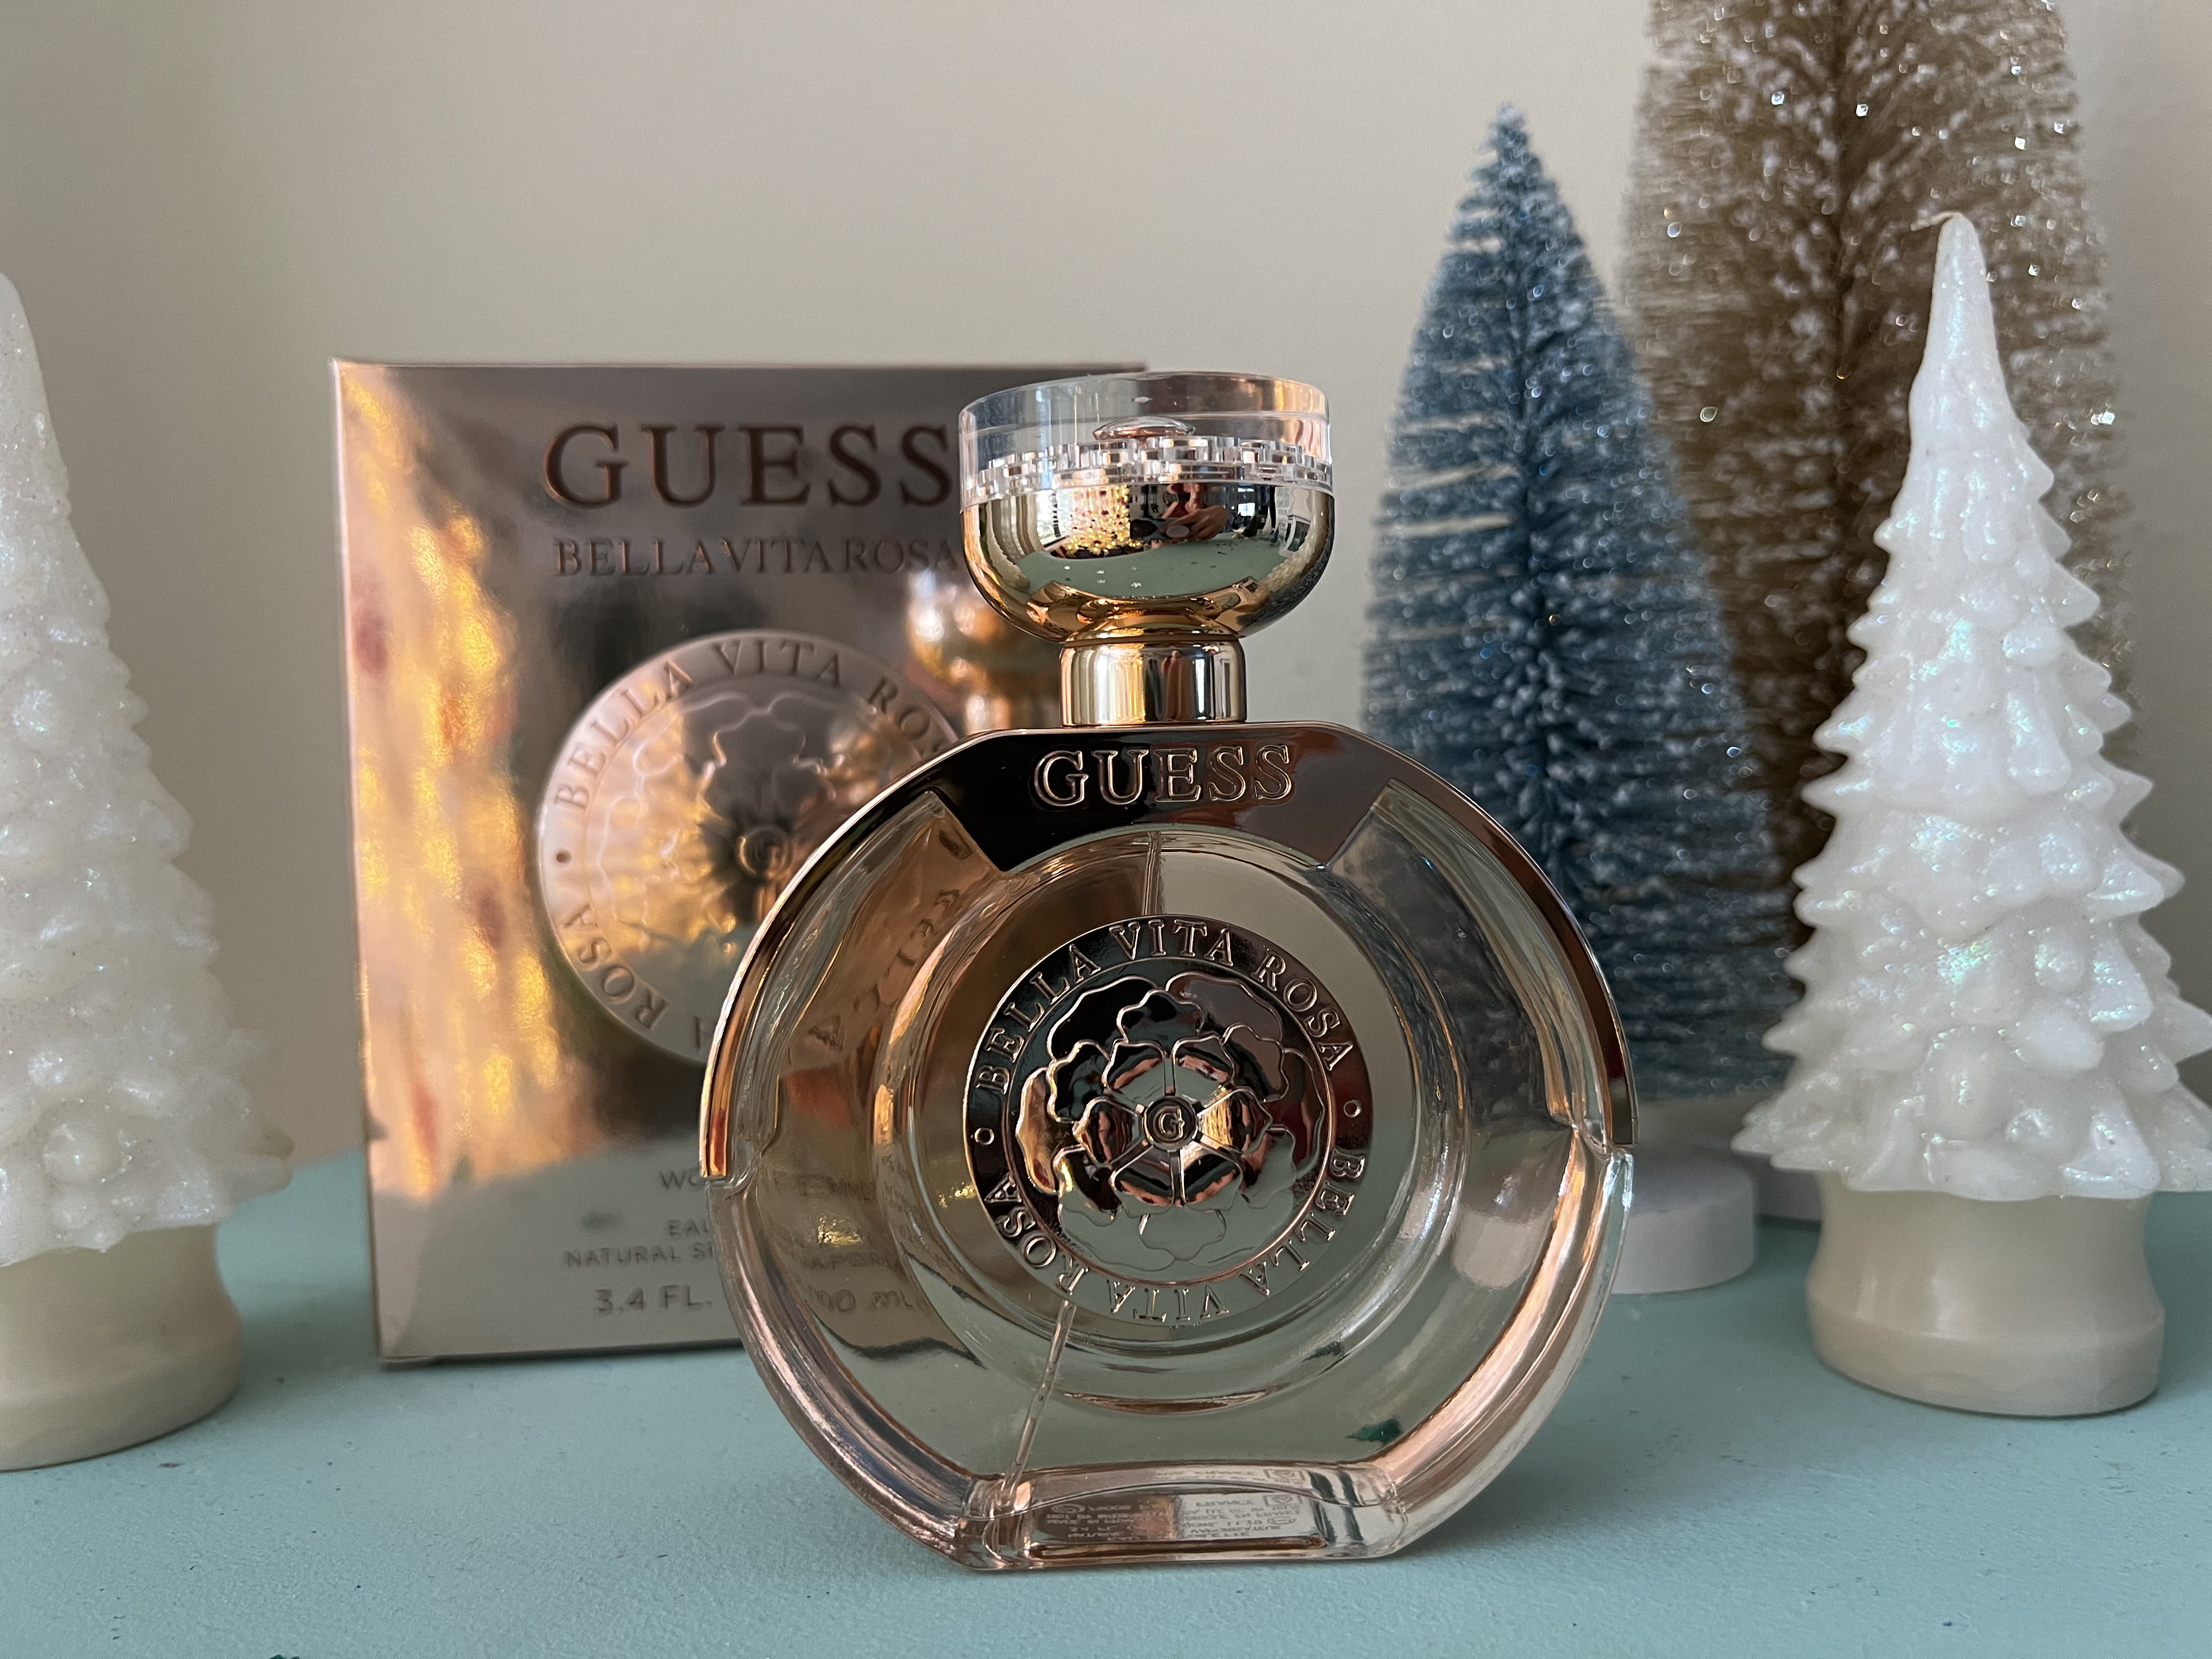 GUESS Bella Vita Rosa perfume - top gifts for her